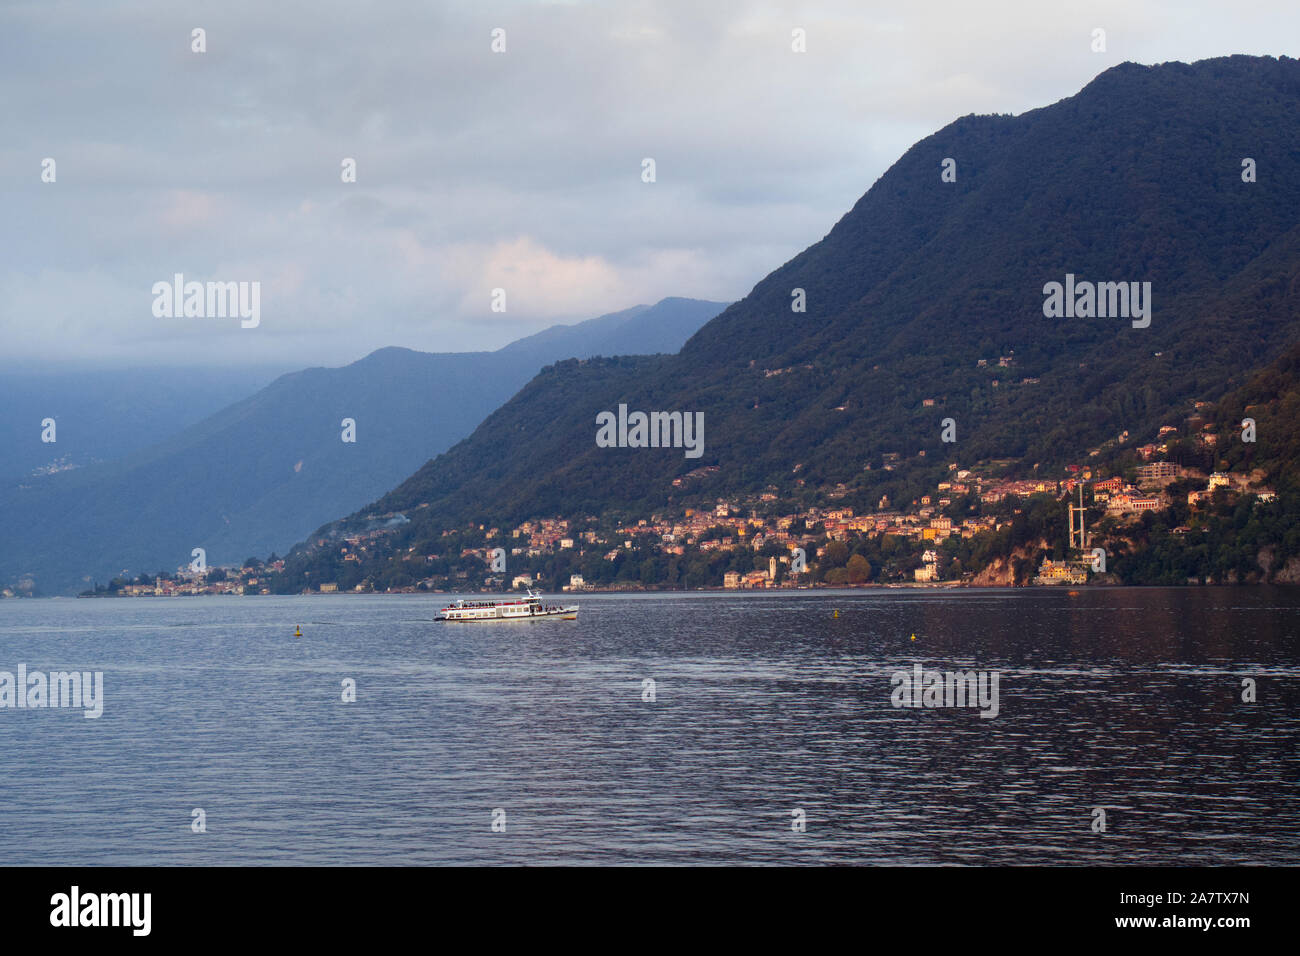 A ferry at lake Como (Italy) taking passengers from east side to west side Stock Photo